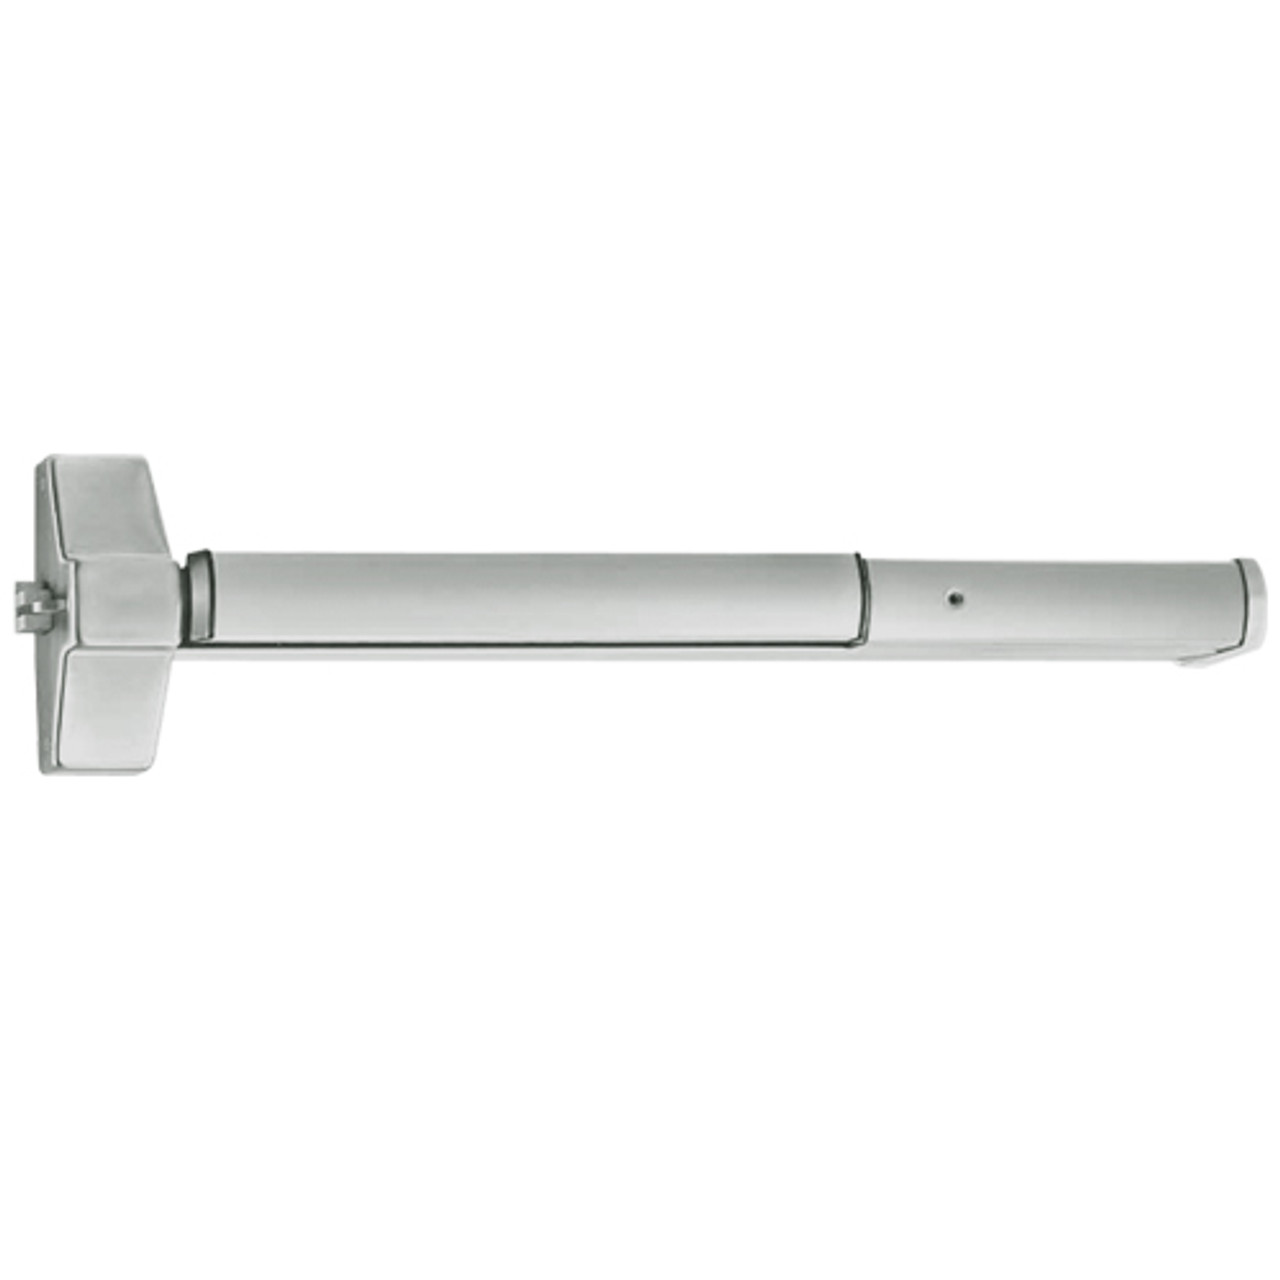 ED5200S-619-MELR Corbin ED5200 Series Non Fire Rated Exit Device with Motor Latch Retraction in Satin Nickel Finish